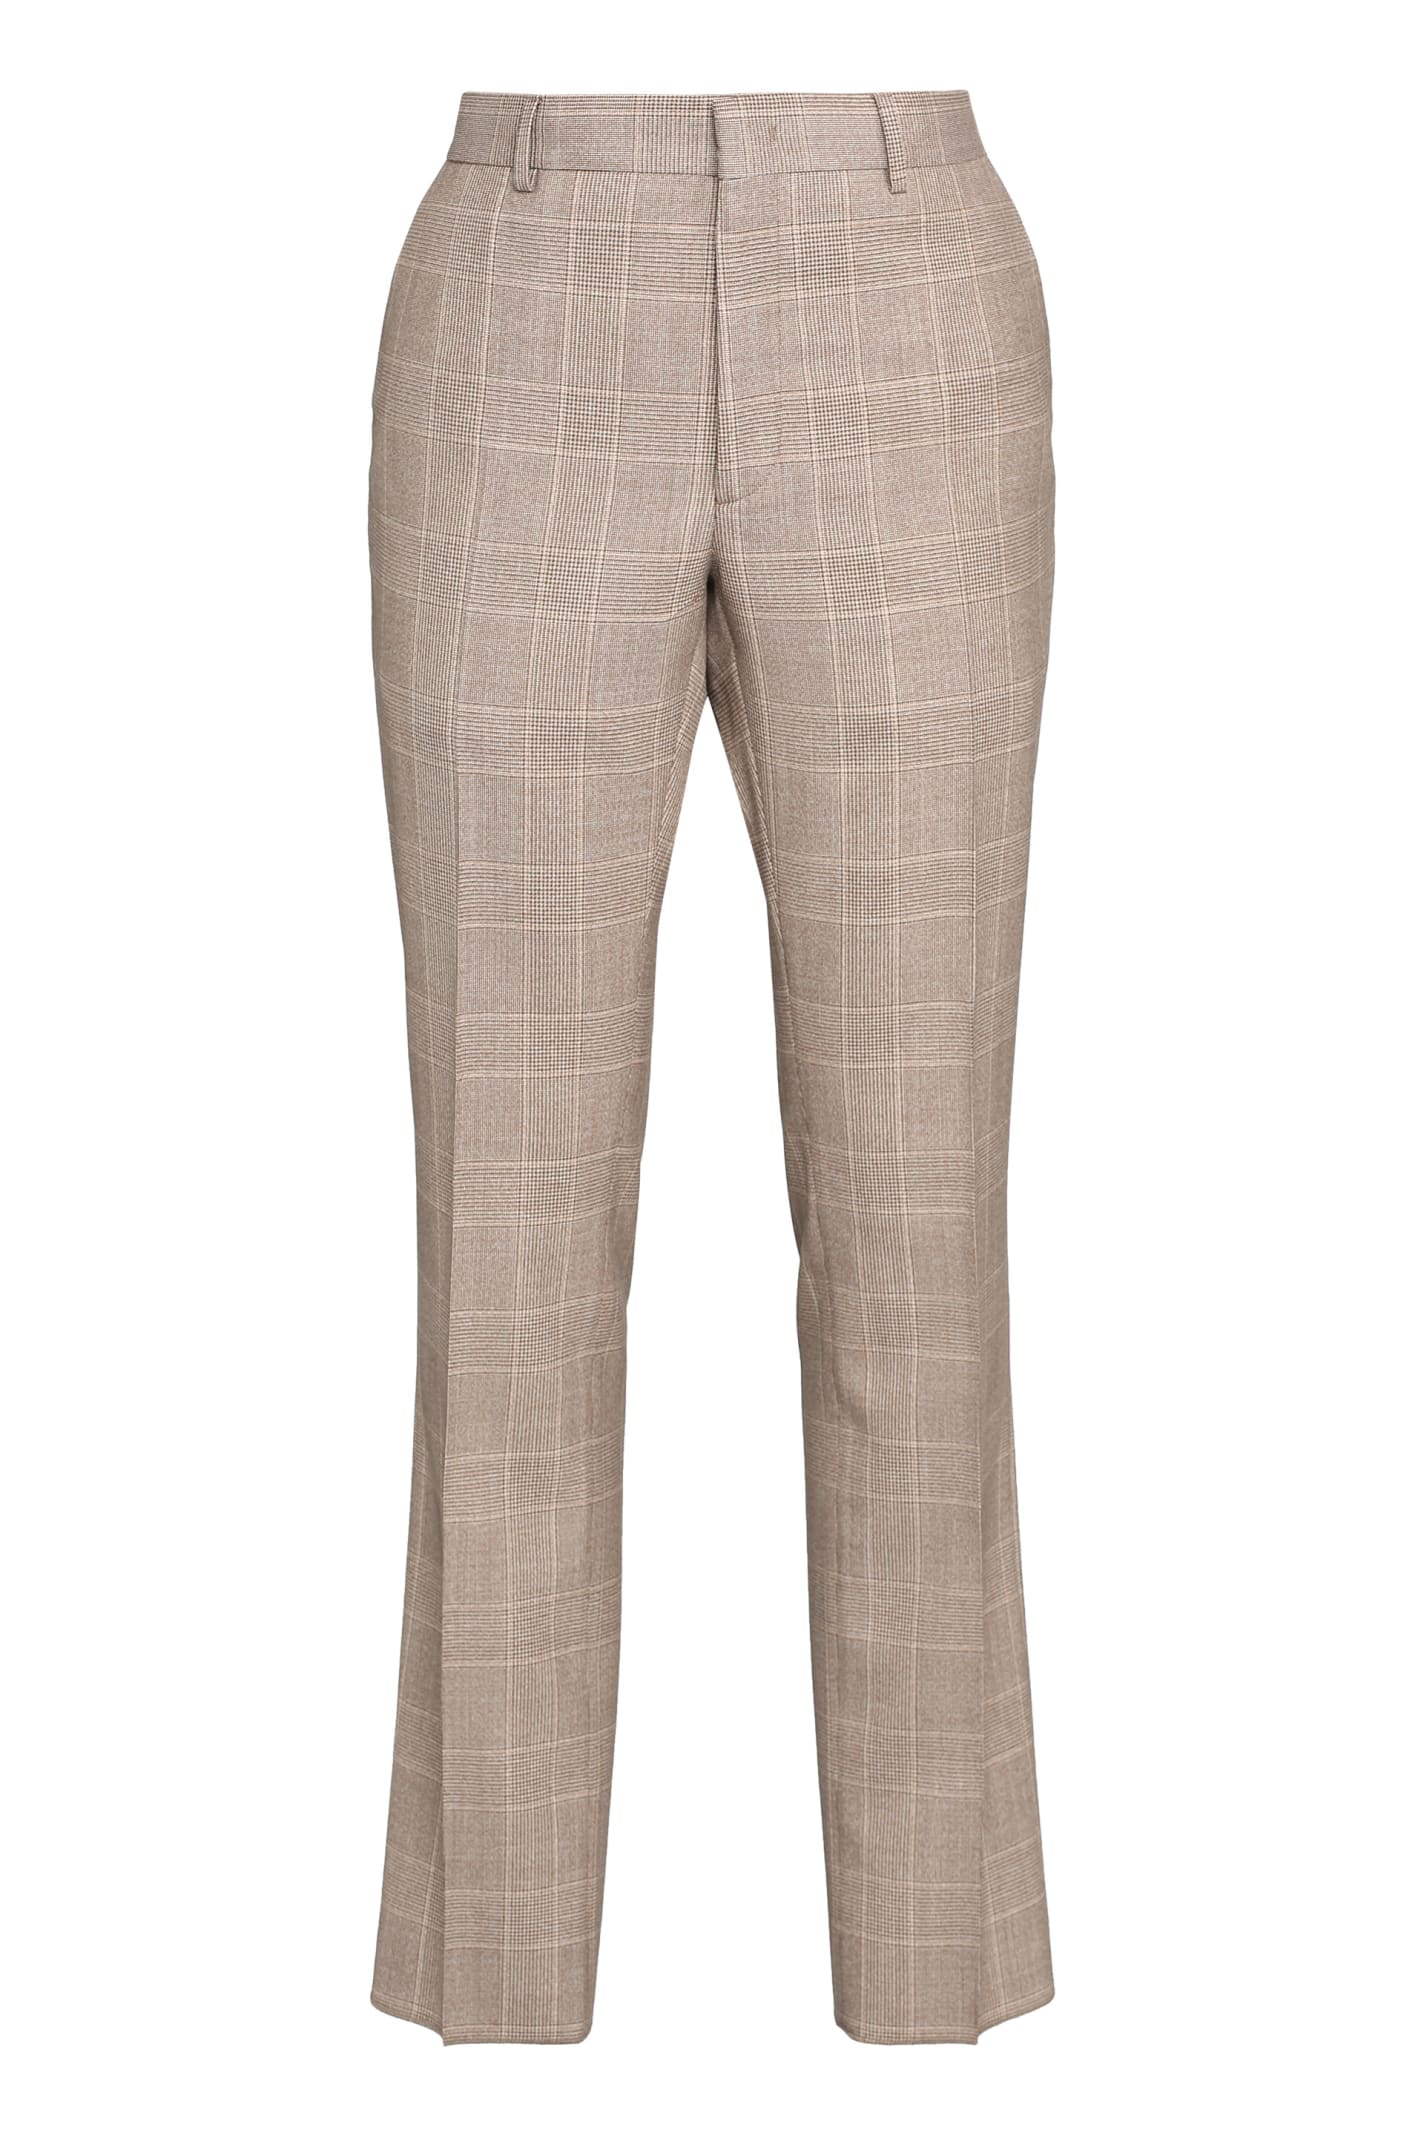 Fendi Prince Of Wales Checked Wool Trousers